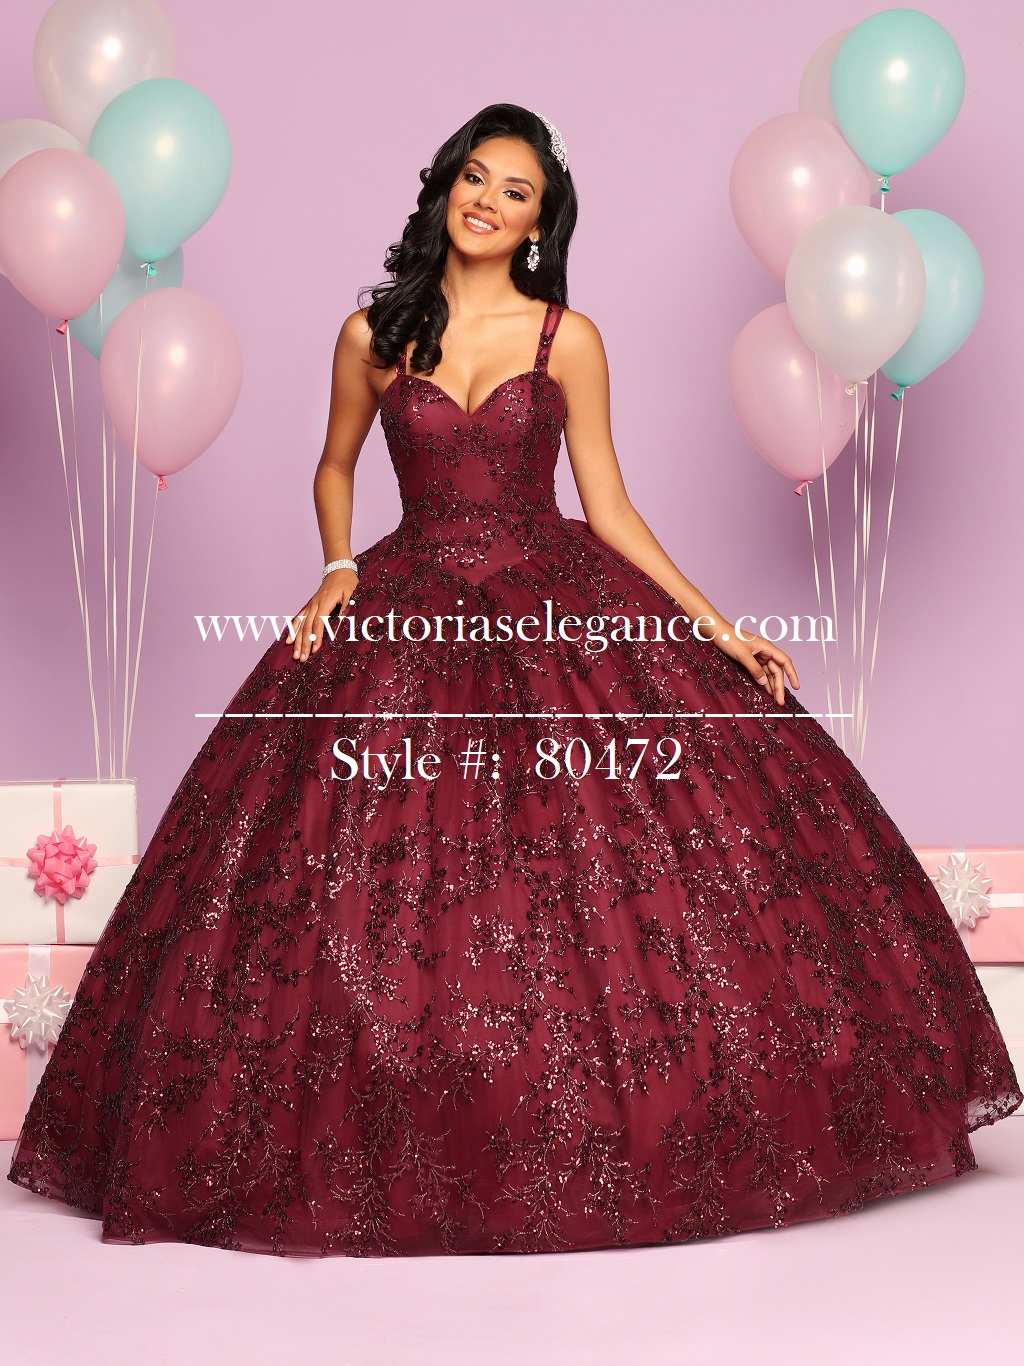 DaVinci Sequined Tulle Ball Gown